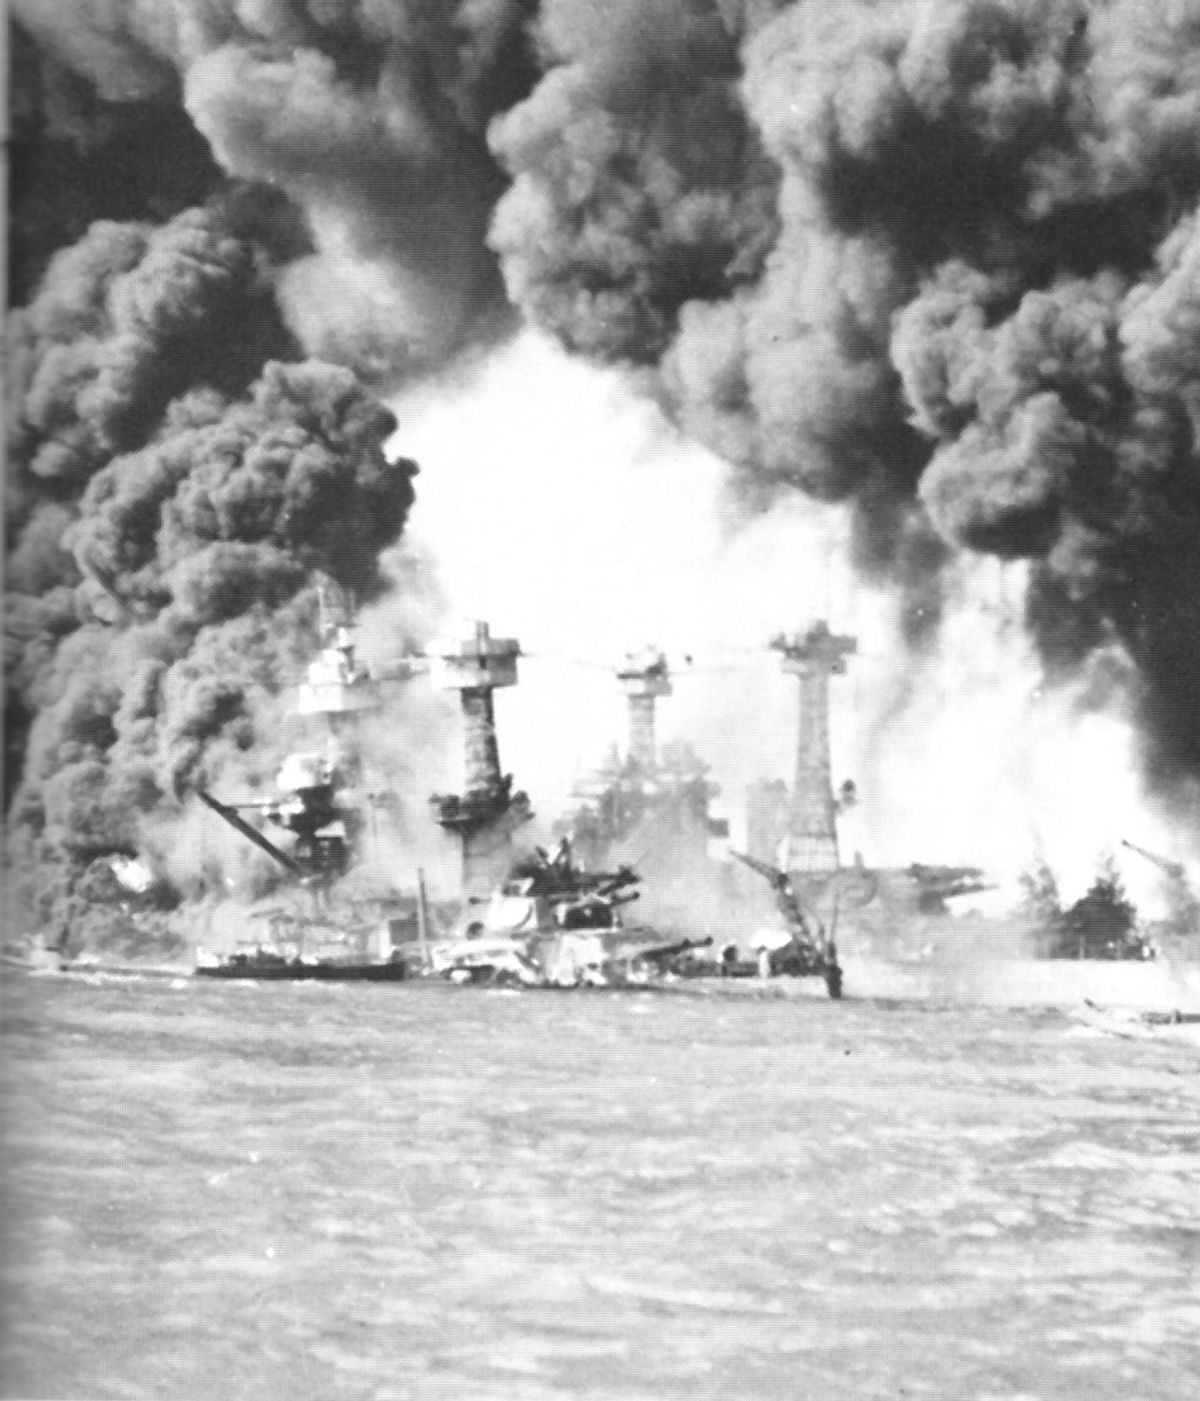 Battleships in Pearl Harbor ablaze after being hit by bombs dropped from Japanese planes on Dec. 7, 1941.  